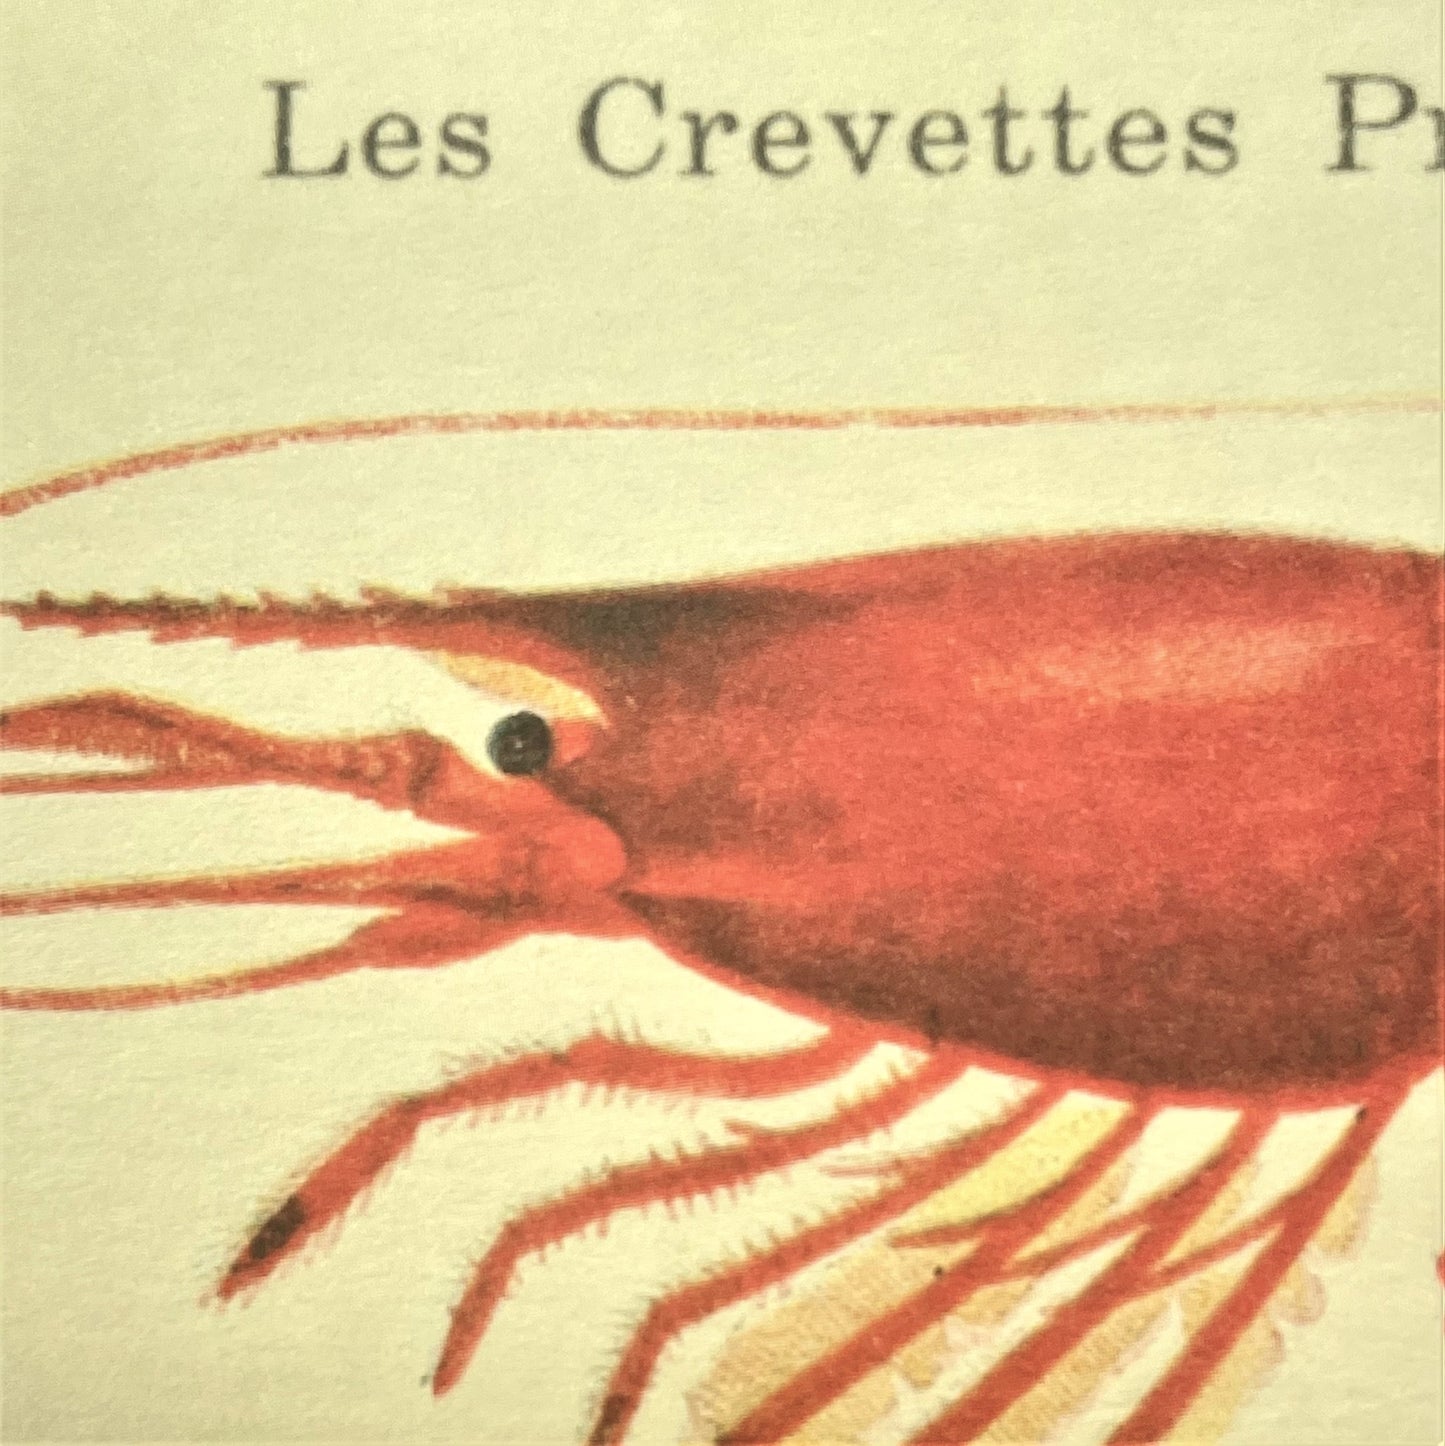 greetings card with image of three crevettes on dark ivory backdrop, close-up